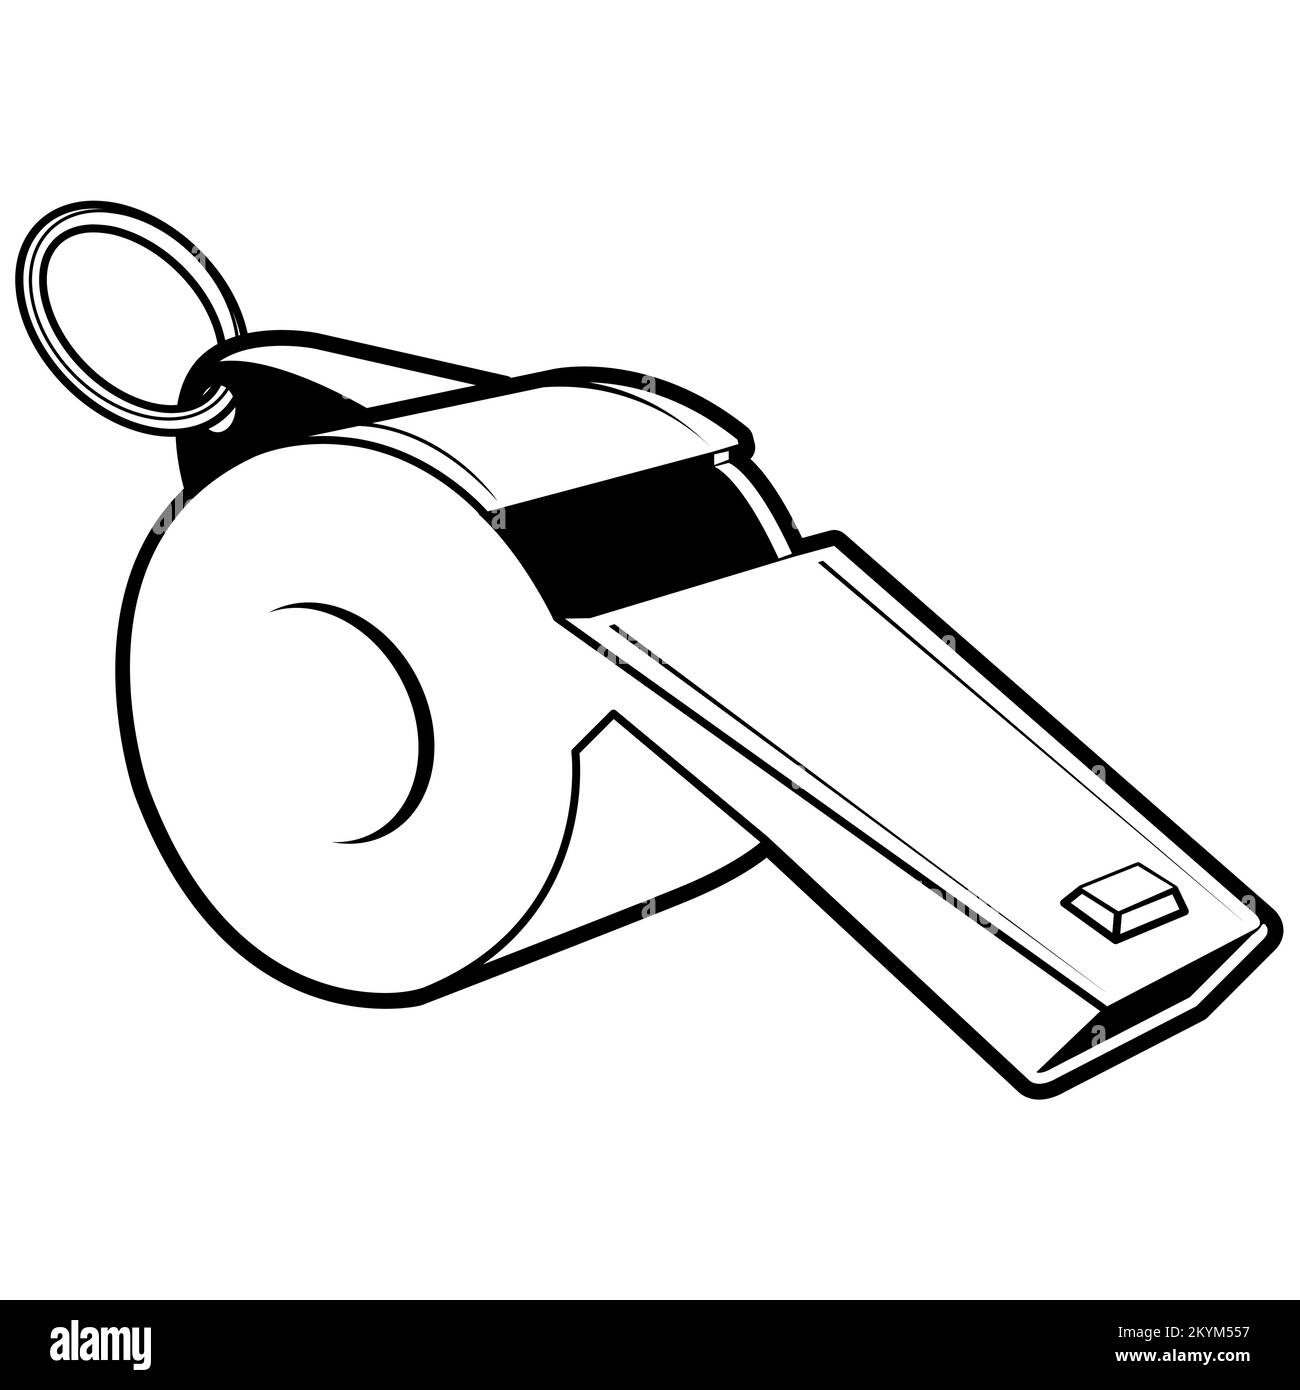 Whistle vector vectors Black and White Stock Photos & Images - Alamy